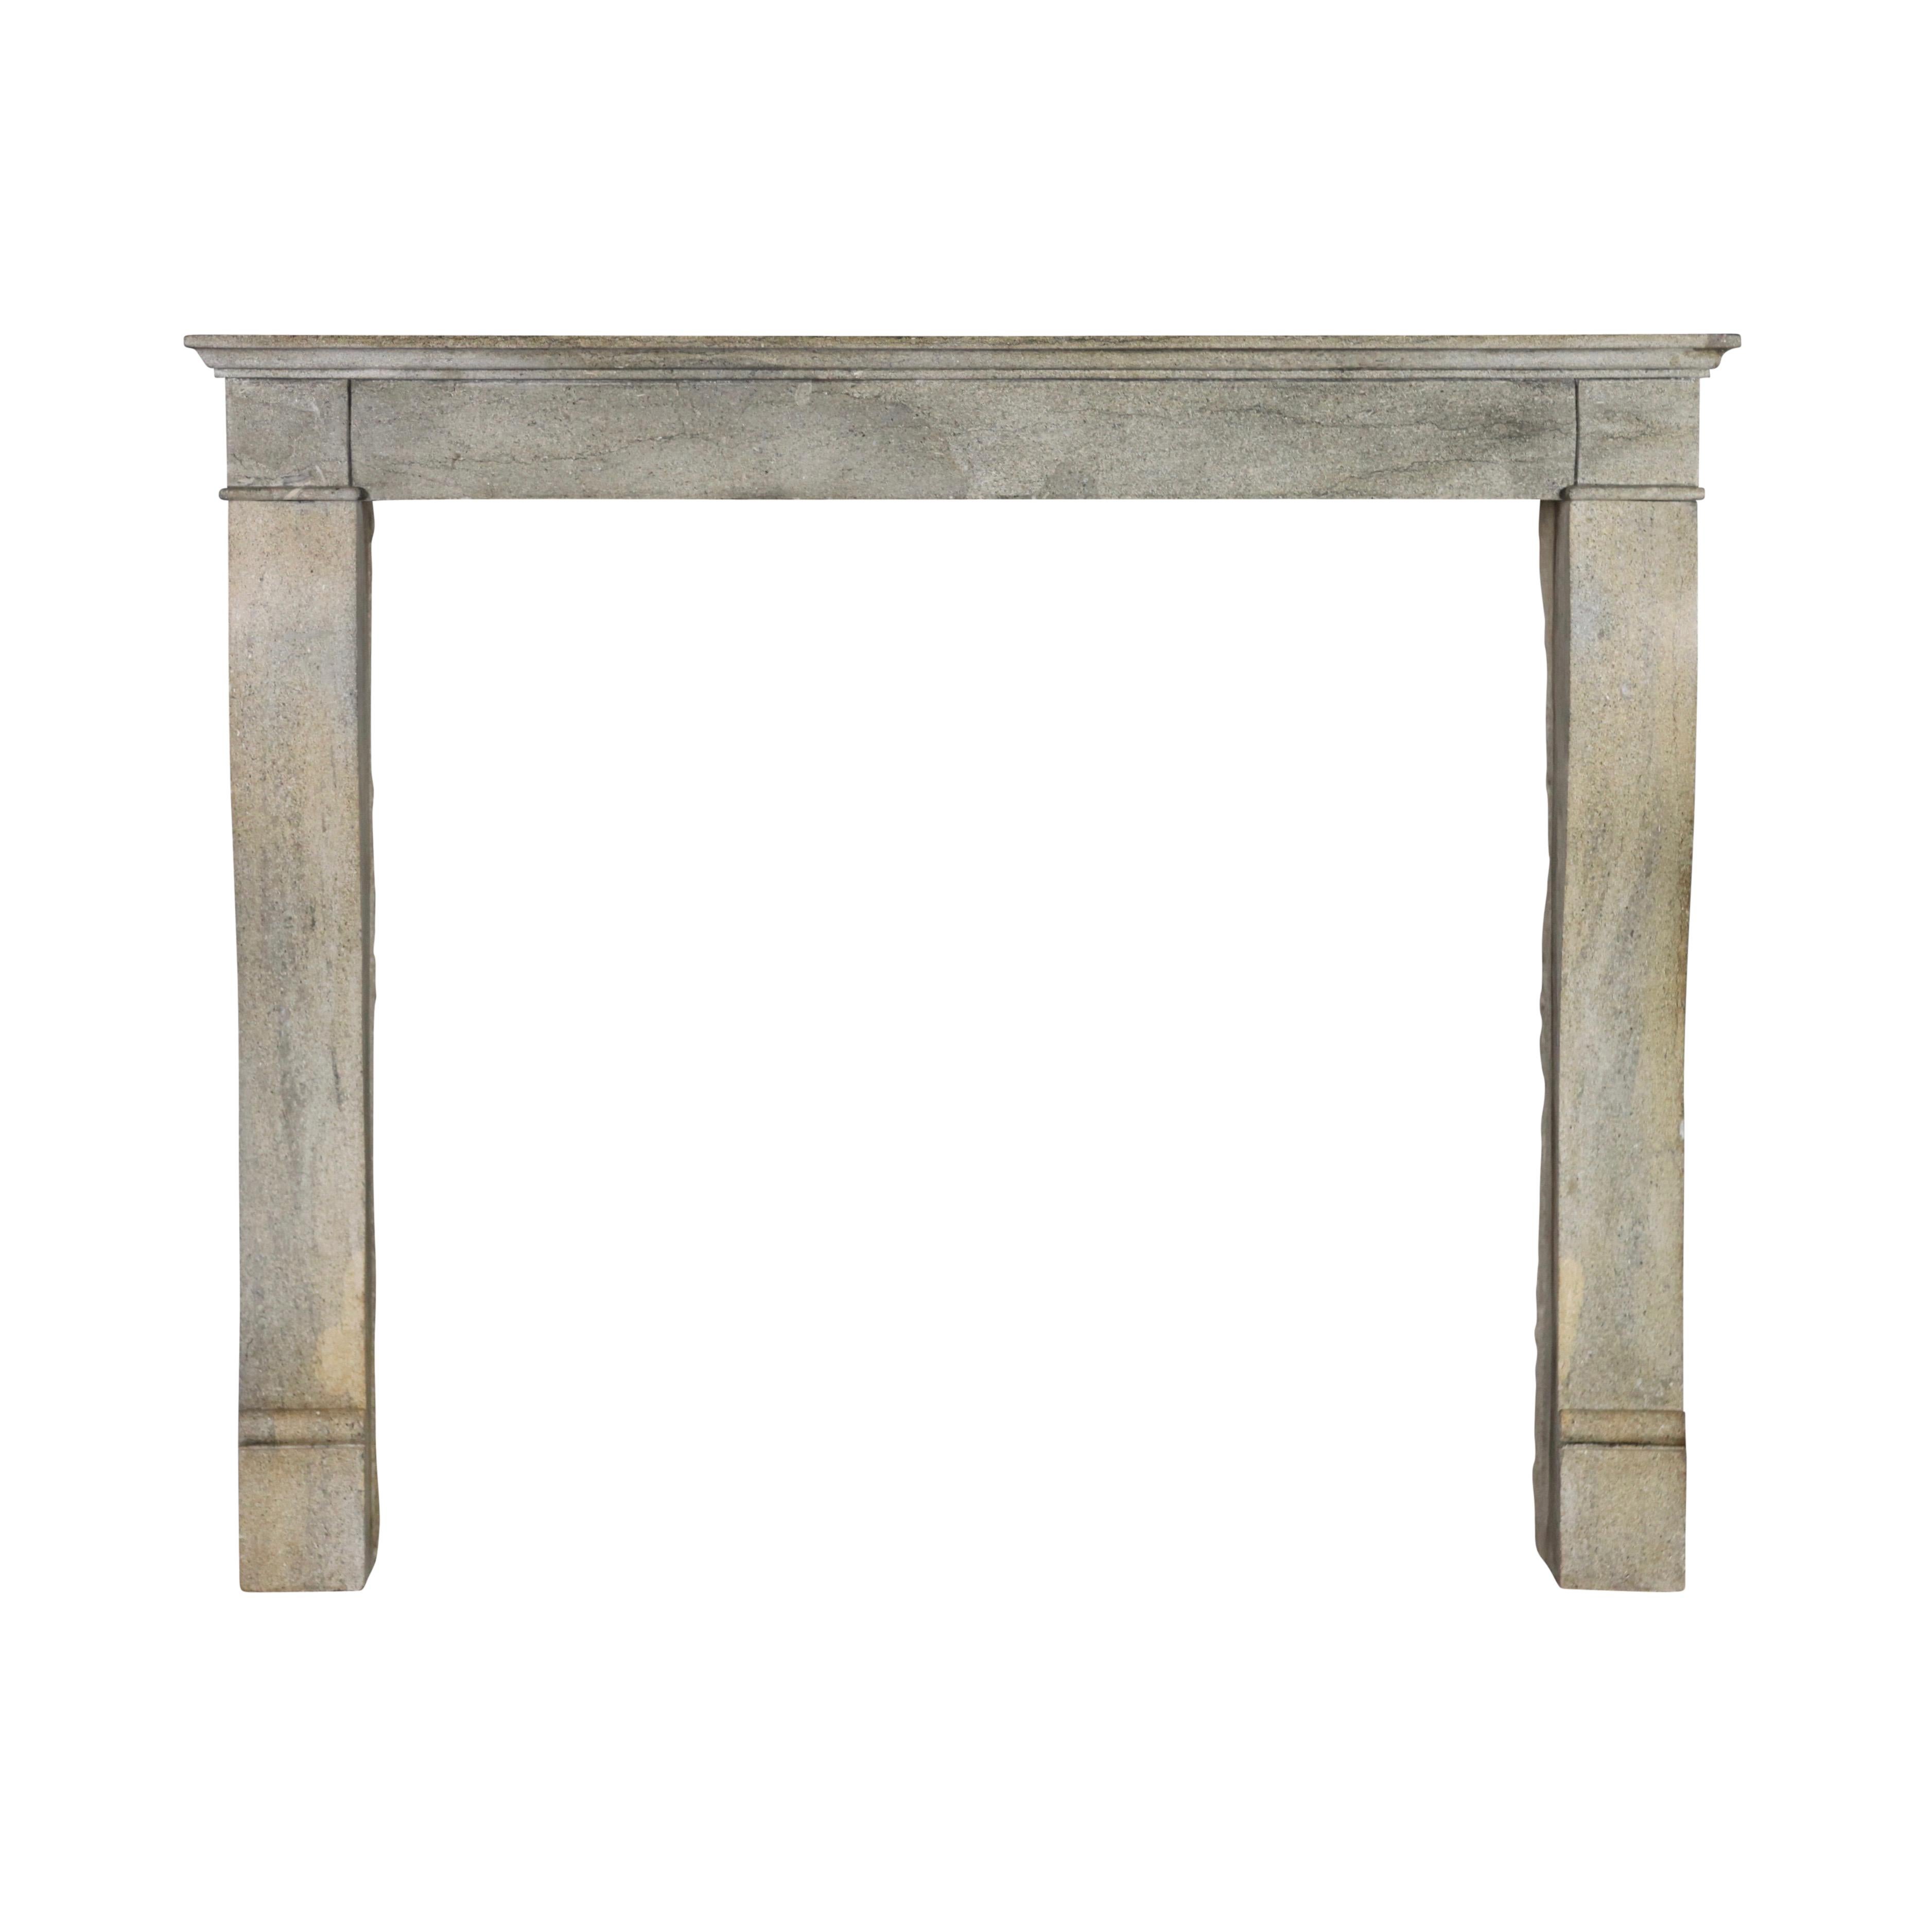 Original Antique Small Fine European Country Fireplace Surround in Grey Stone For Sale